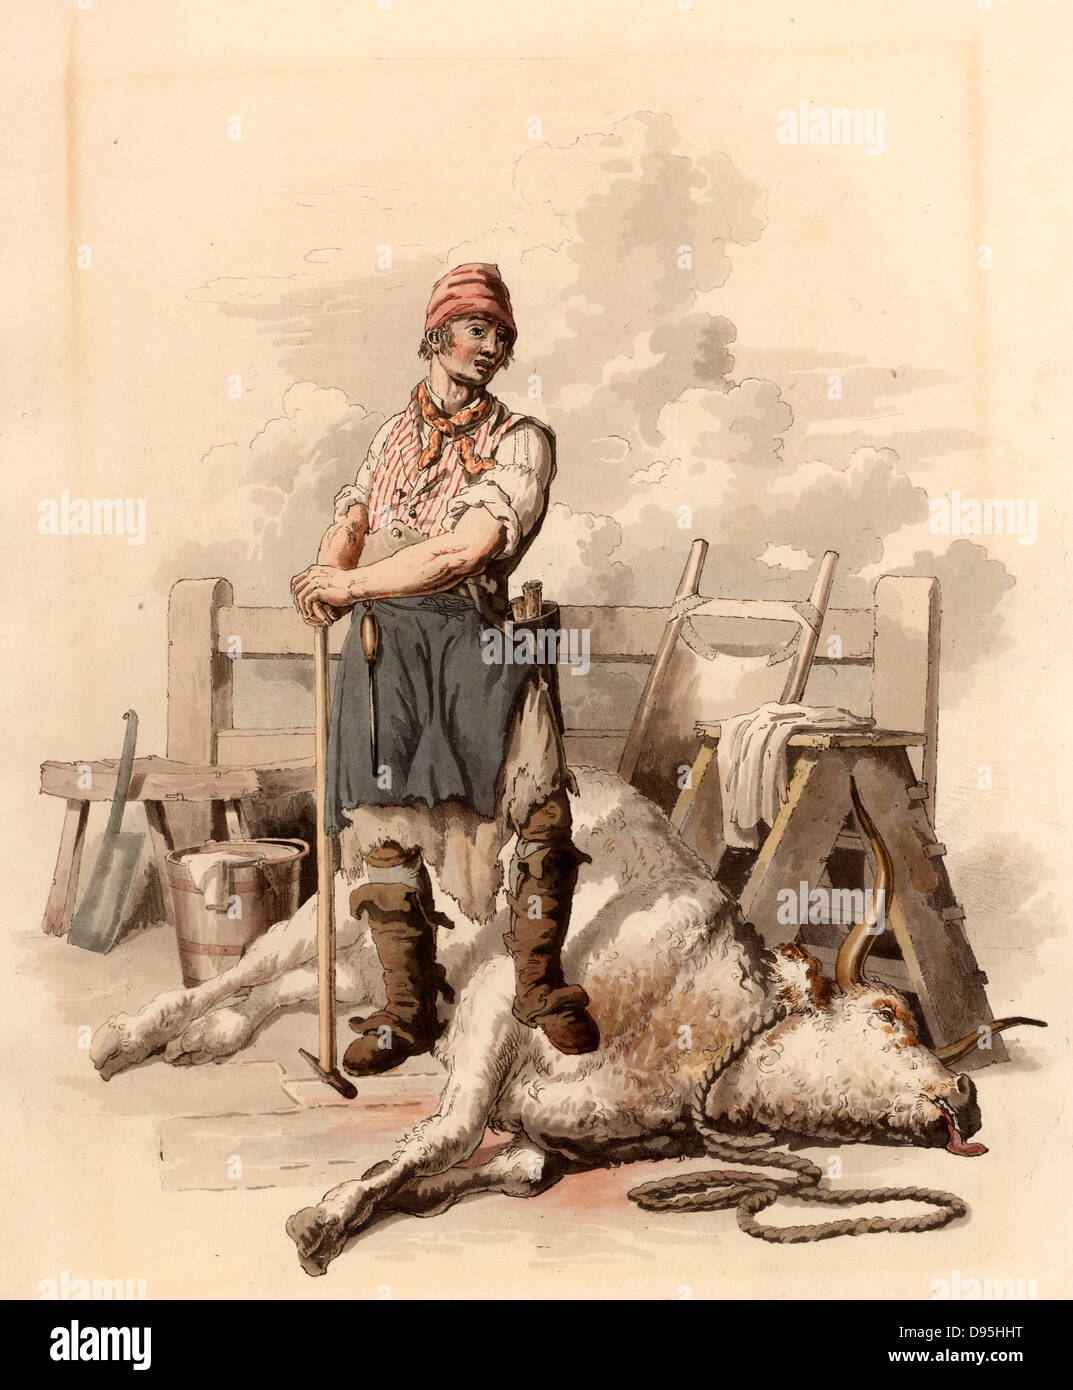 The Slaughterman.  The ox has been killed by blows of the pole-axe to the head.  The slaughterman leans on the pole-axe after the exertion of killing the beast.  A steel for sharpening his tools hangs from his waist.  A cleaver leans against a stool on the left,  and a butcher's tray leans against the hitching rail on centre right.  From 'Costume of Great Britain' by William Henry Pyne (London, 1808). Aquatint. Stock Photo